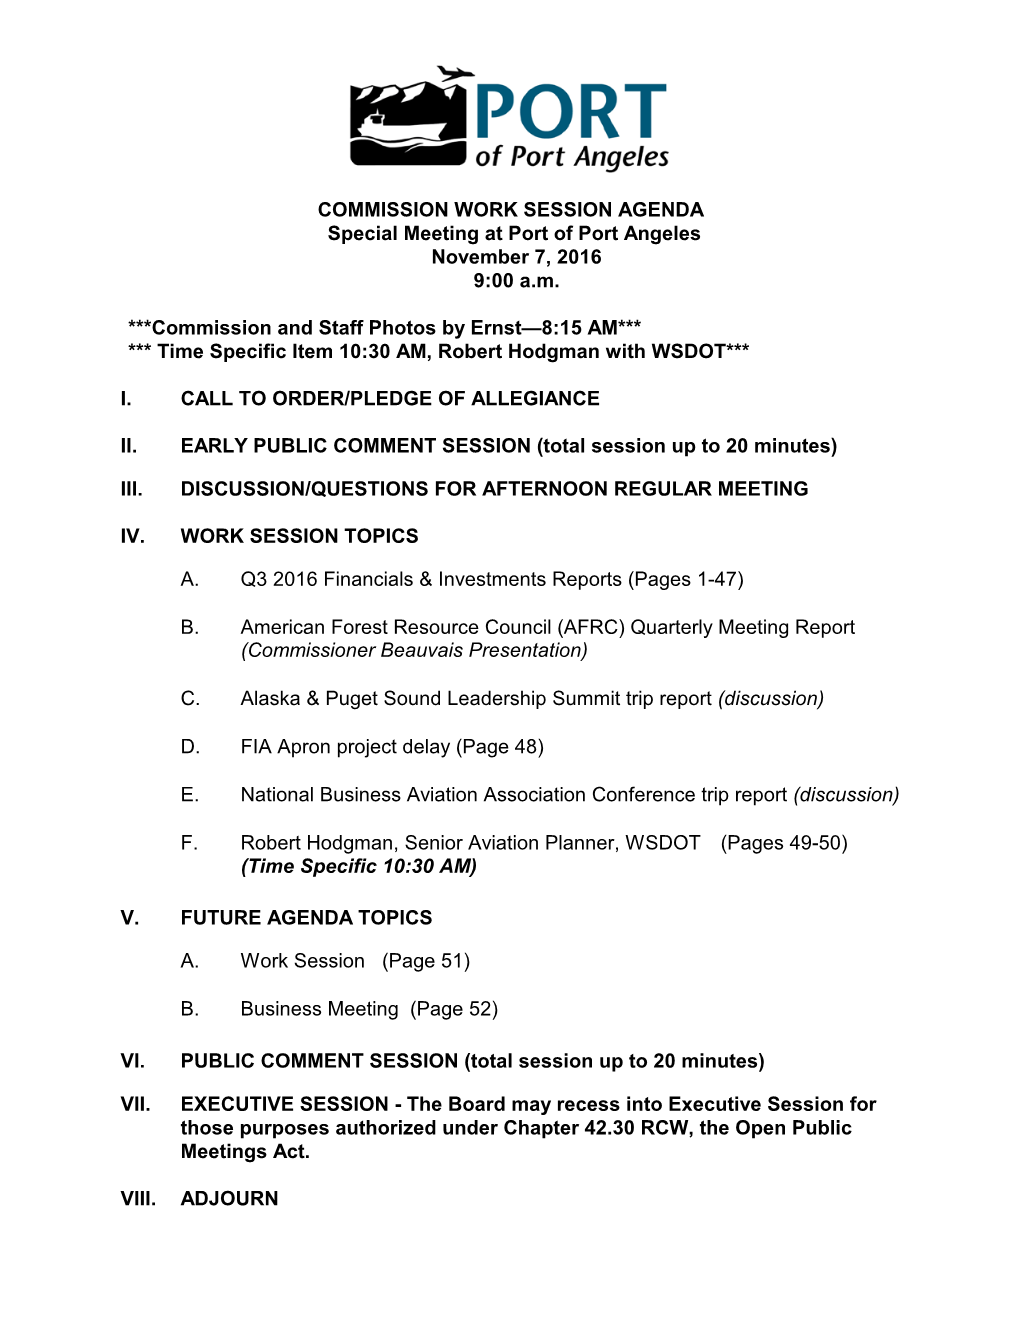 COMMISSION WORK SESSION AGENDA Special Meeting at Port of Port Angeles November 7, 2016 9:00 A.M